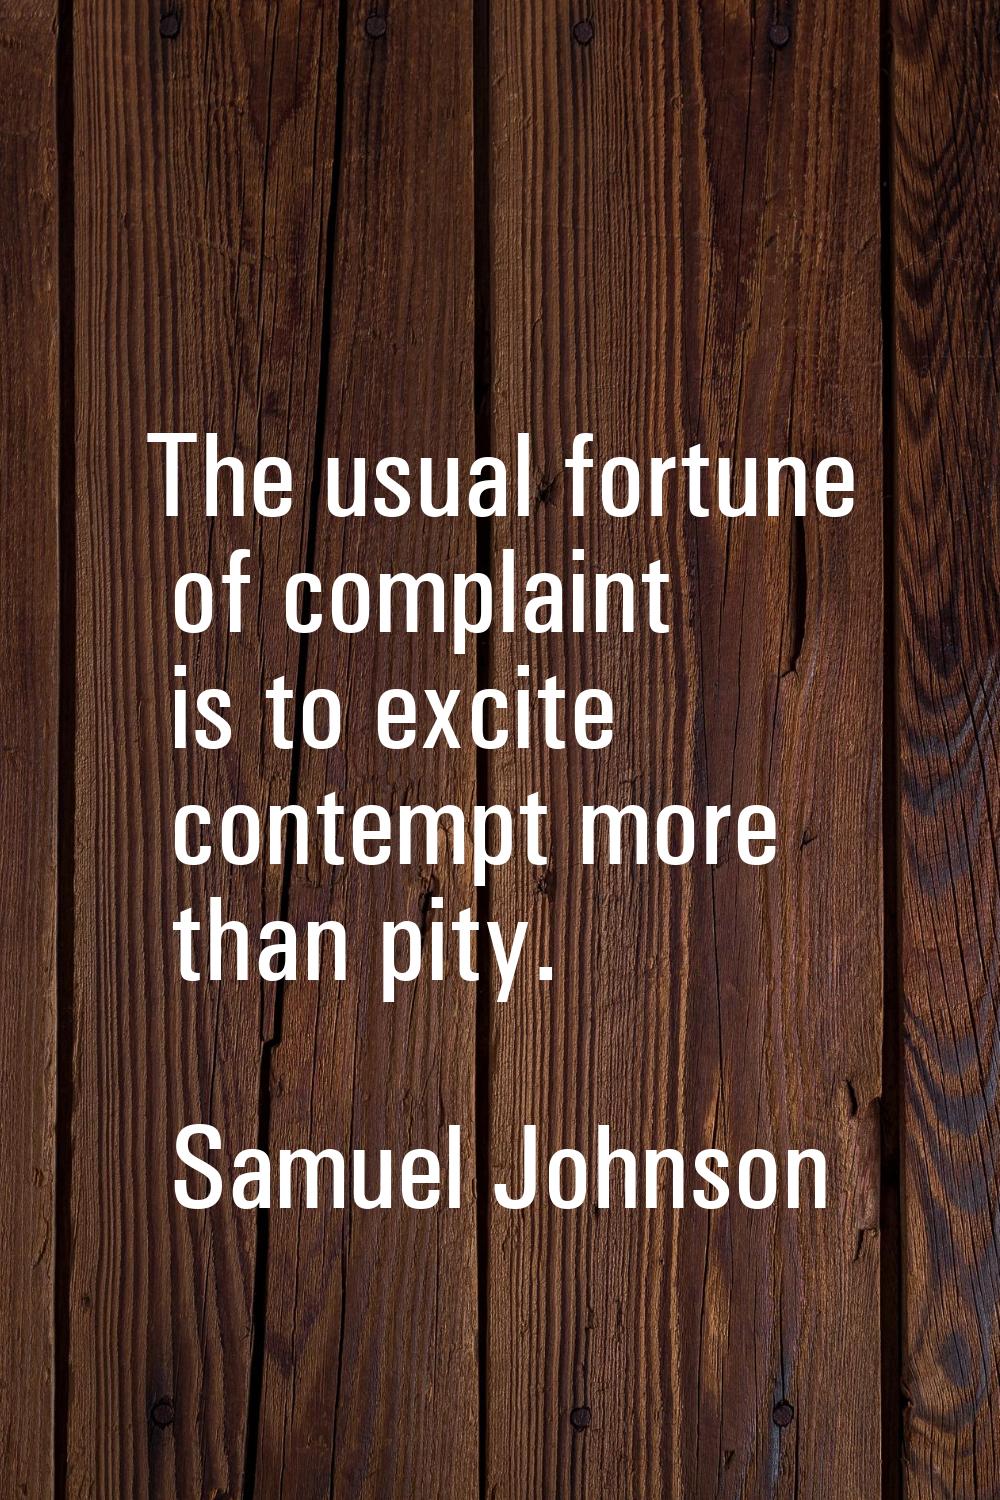 The usual fortune of complaint is to excite contempt more than pity.